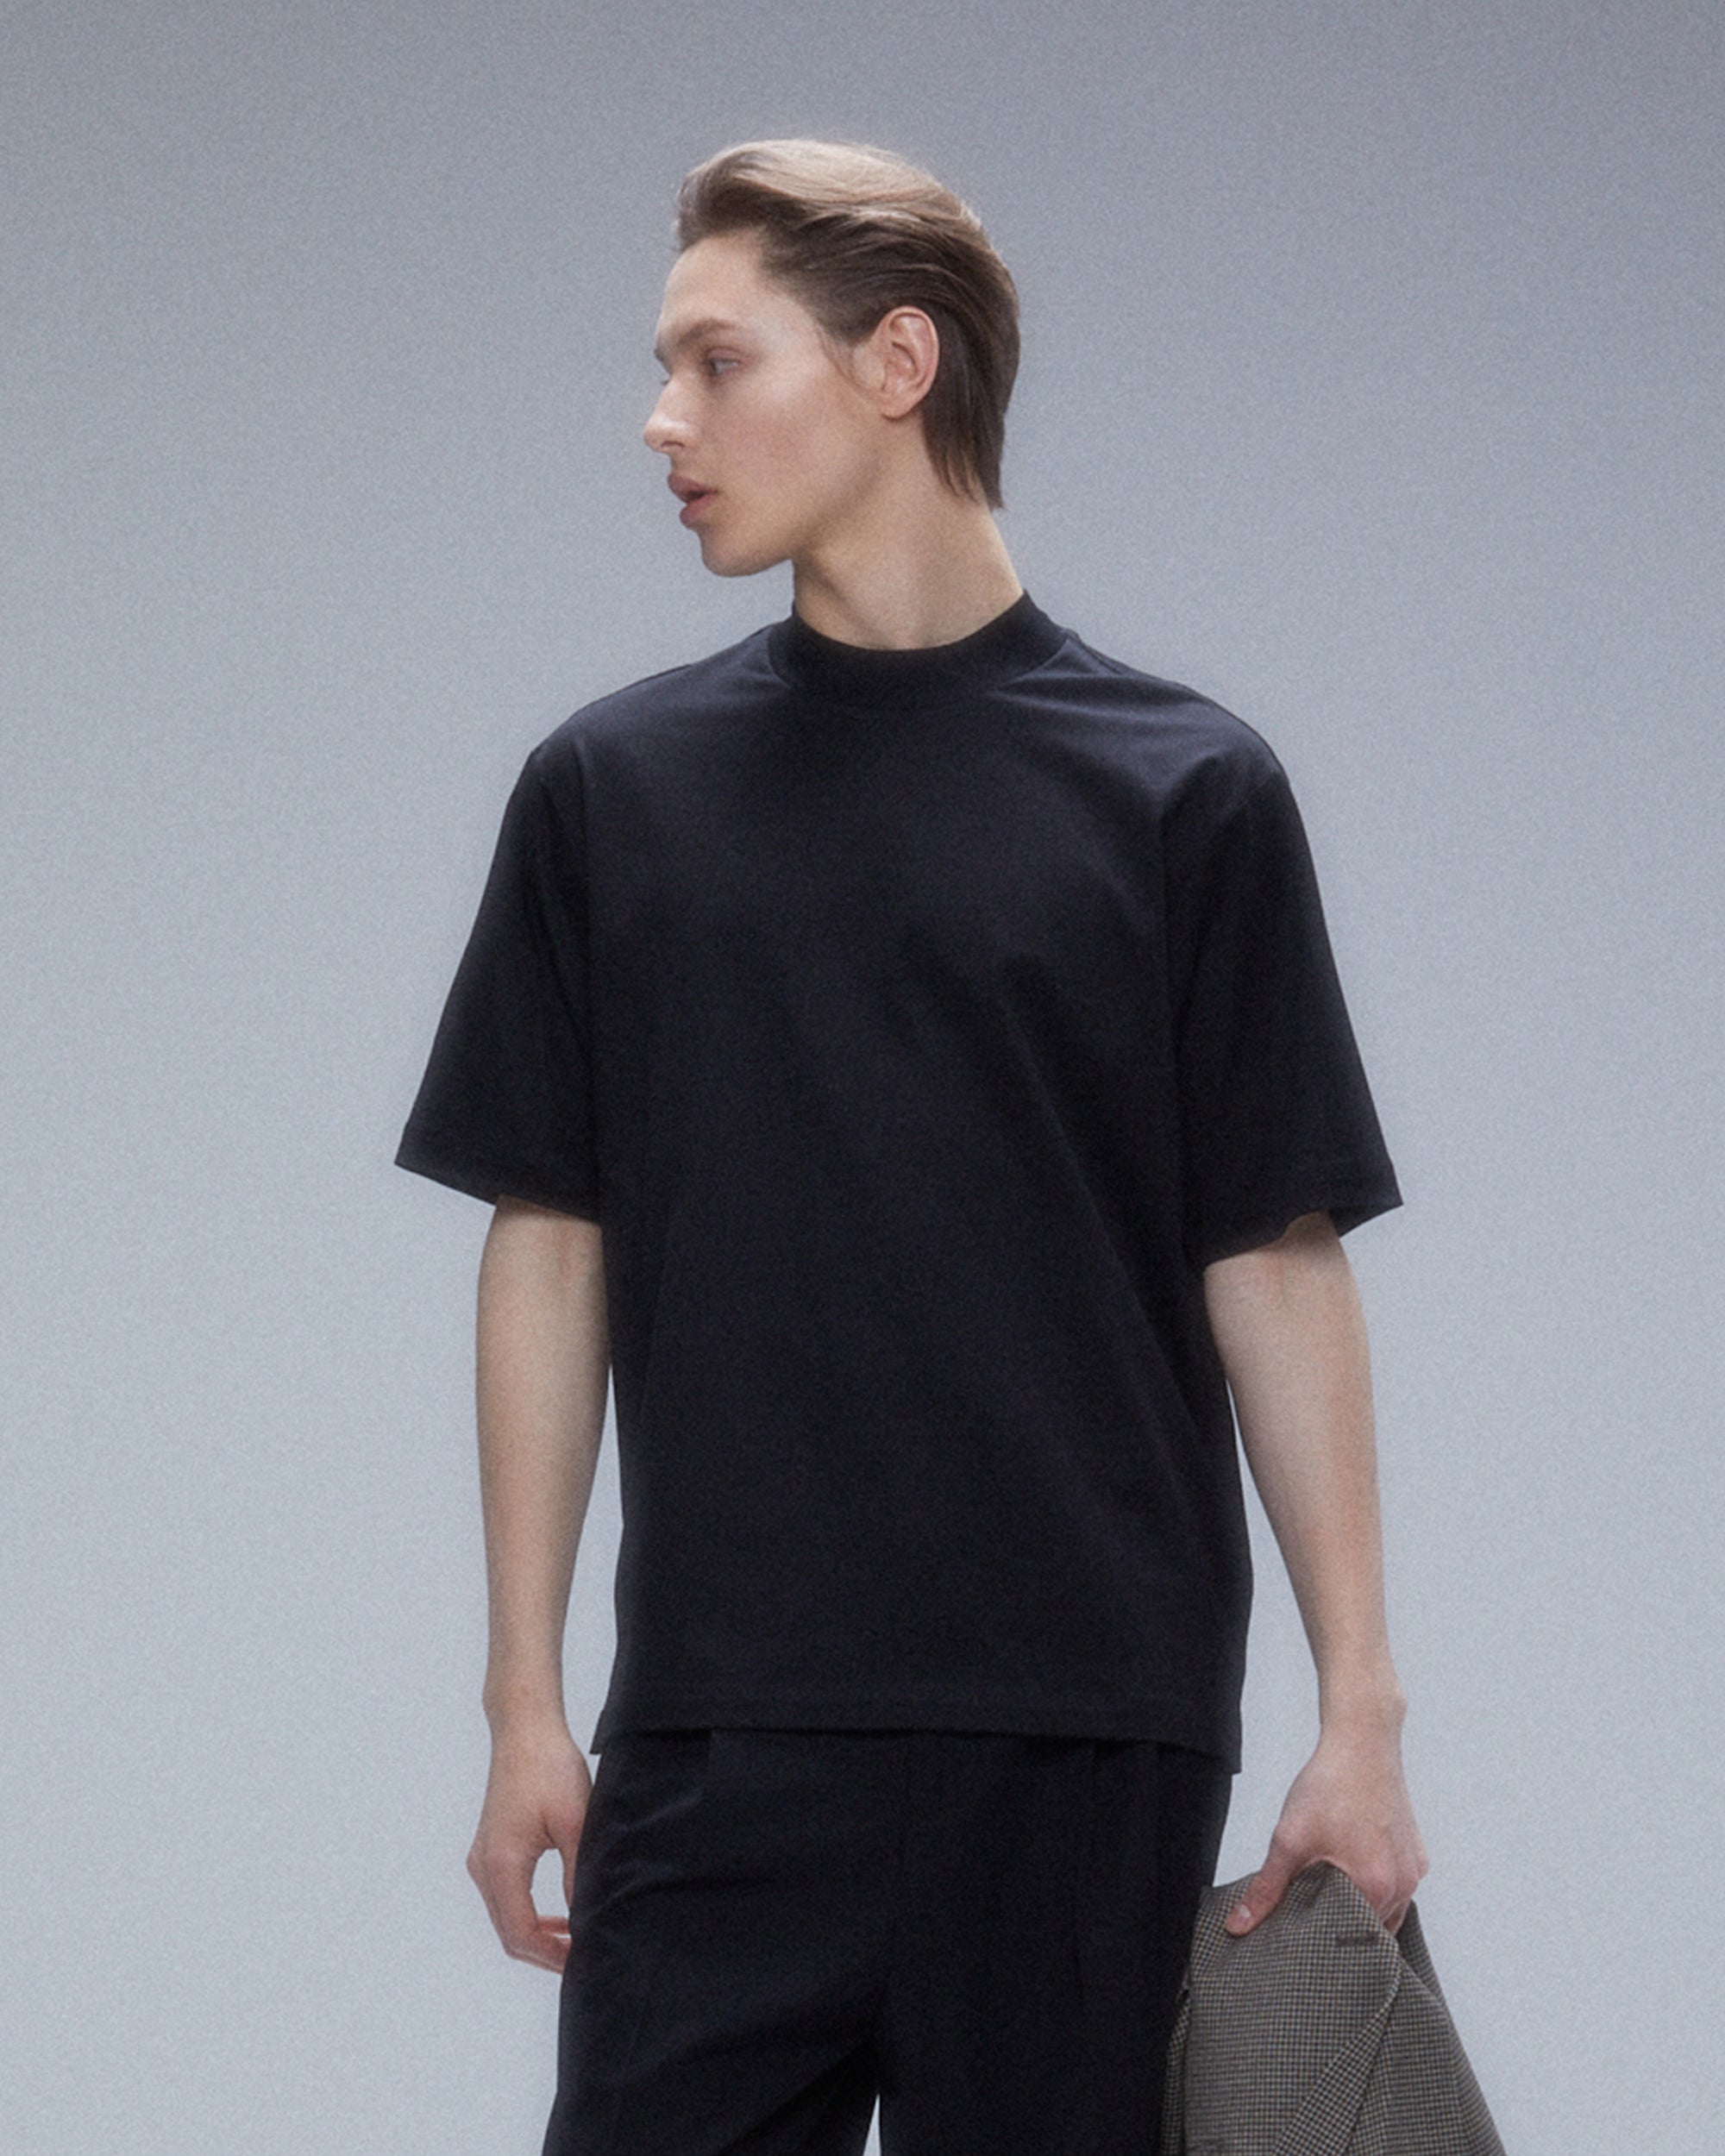 Cut-out mock neck t-shirt, Collection 2019